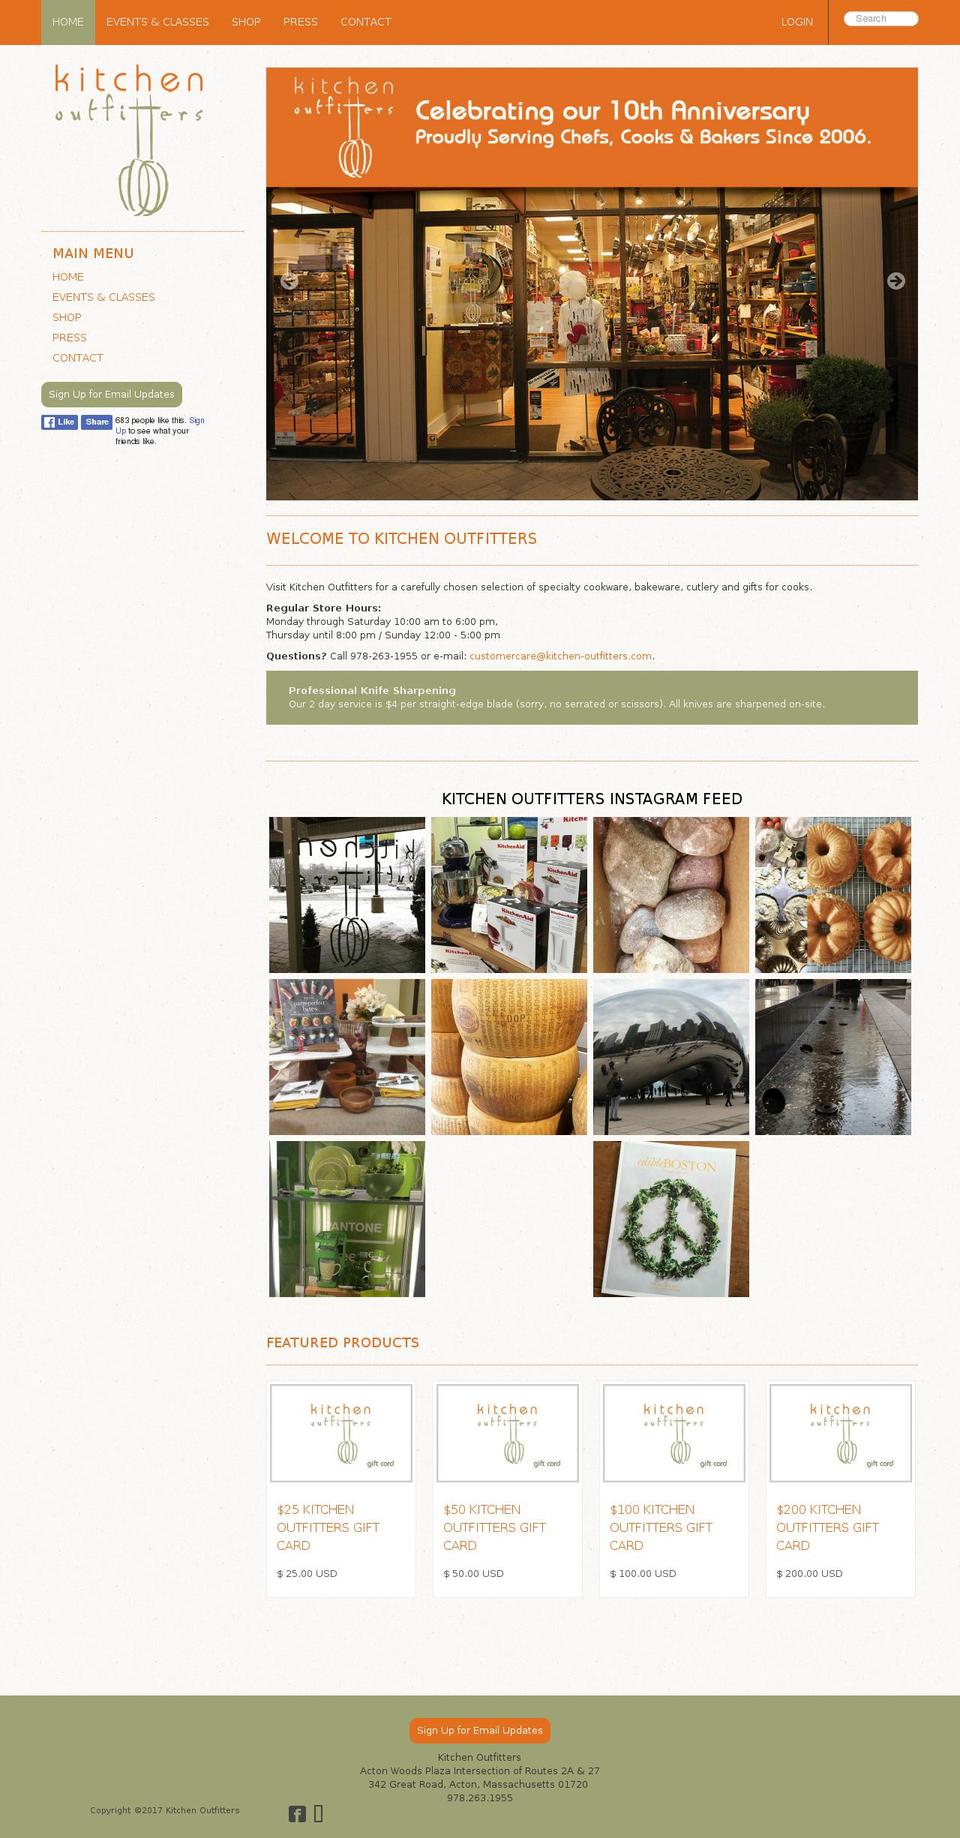 kitchen-outfitters.com shopify website screenshot